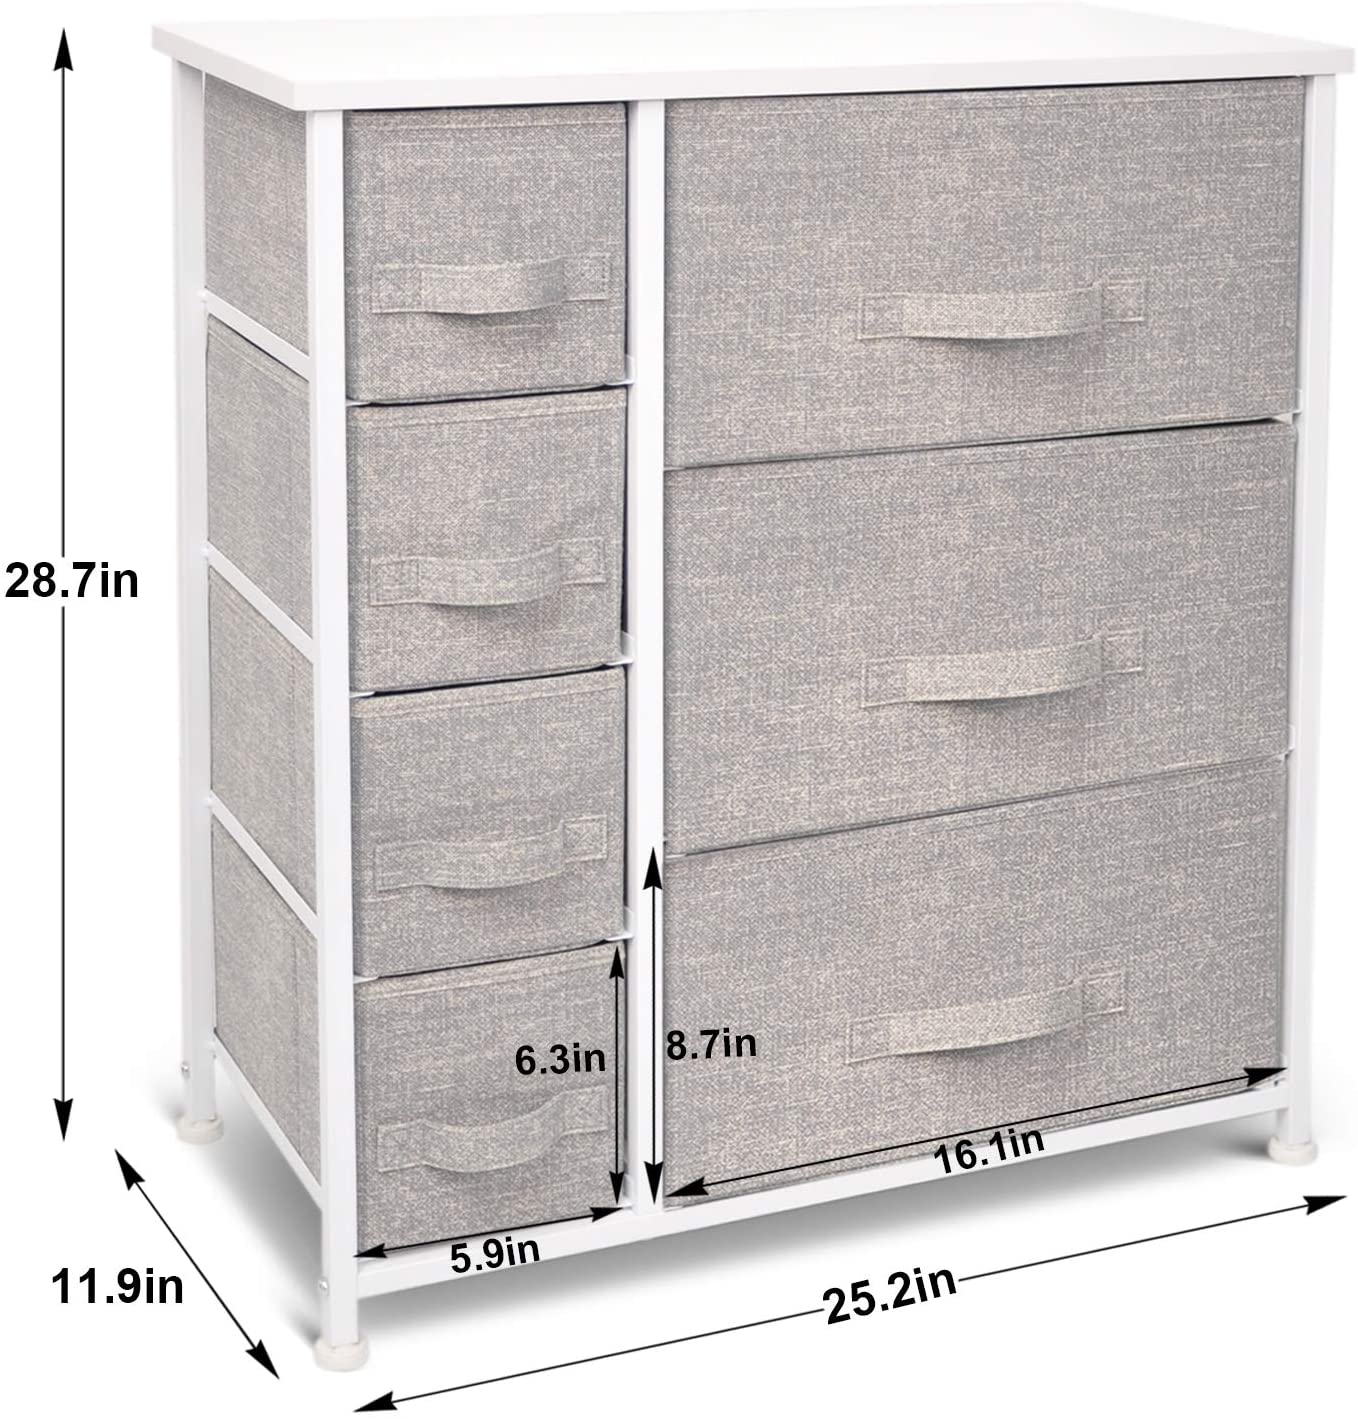 CERBIOR Drawer Dresser Storage Organizer 7-Drawer Closet Shelves, Sturdy Steel Frame Wood Top with Easy Pull Fabric Bins for Clothing, Blankets (7-Grey Drawers)